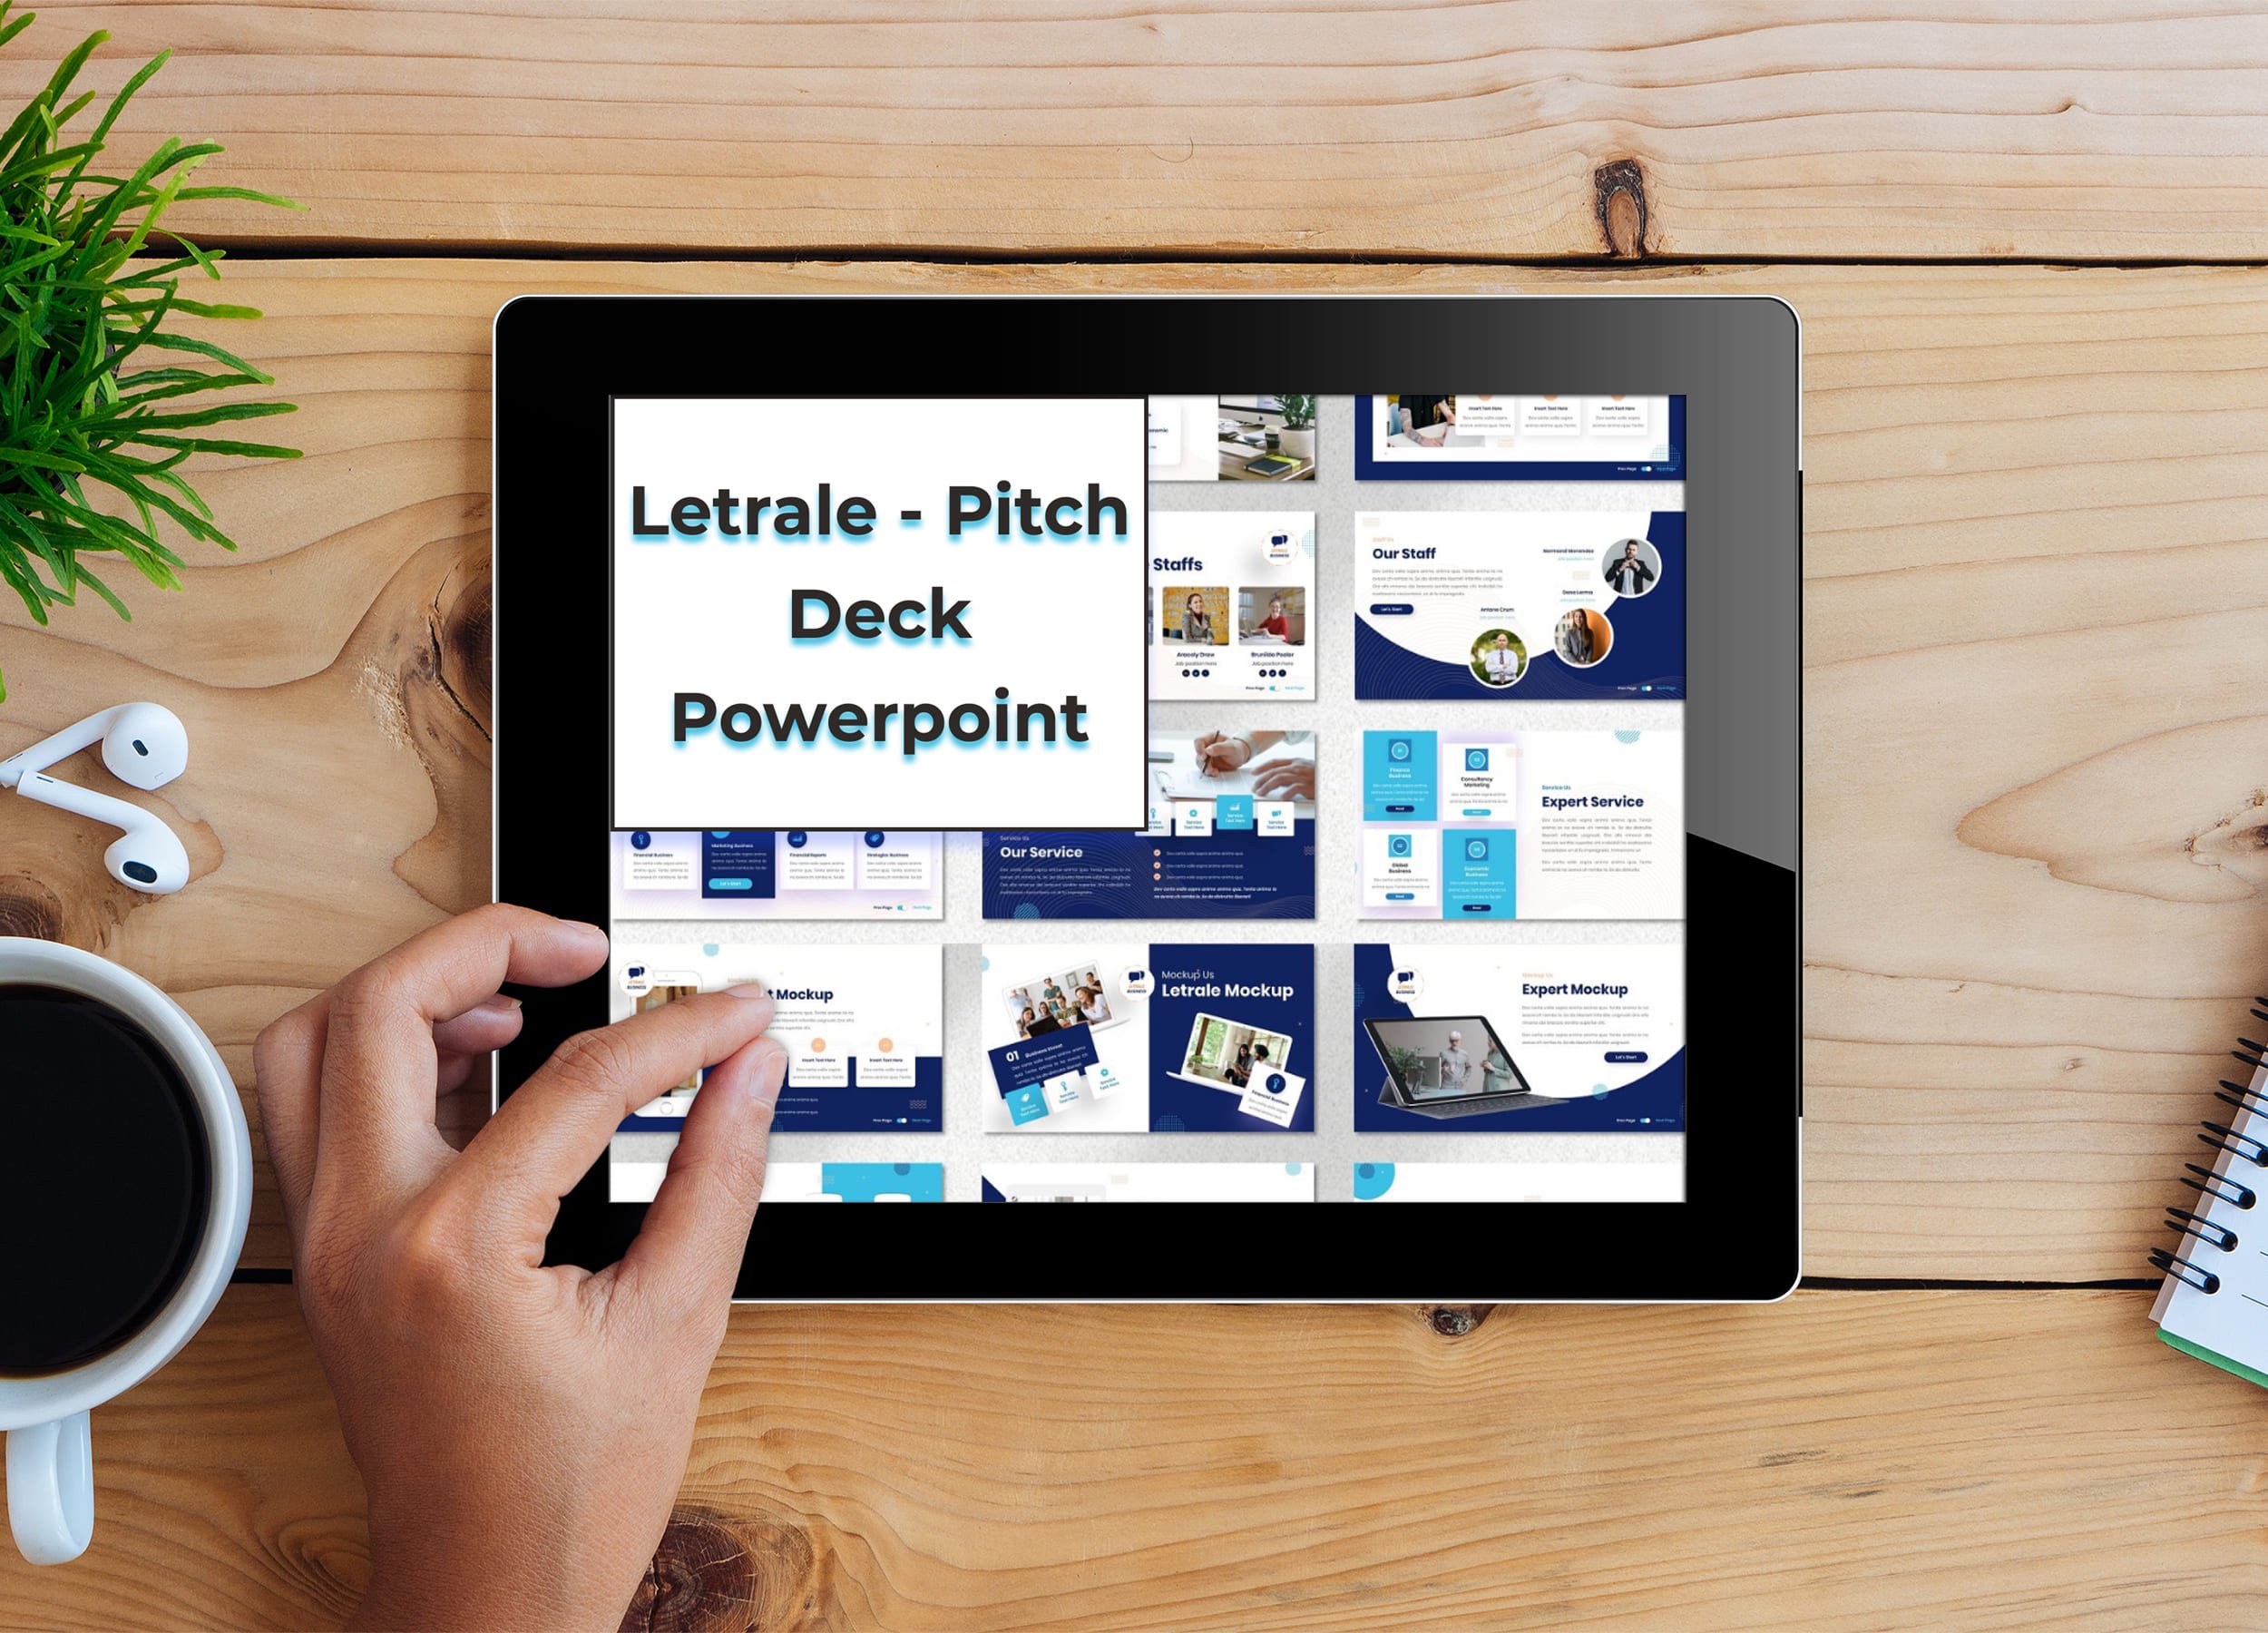 Tablet option of the Letrale - Pitch Deck Powerpoint.